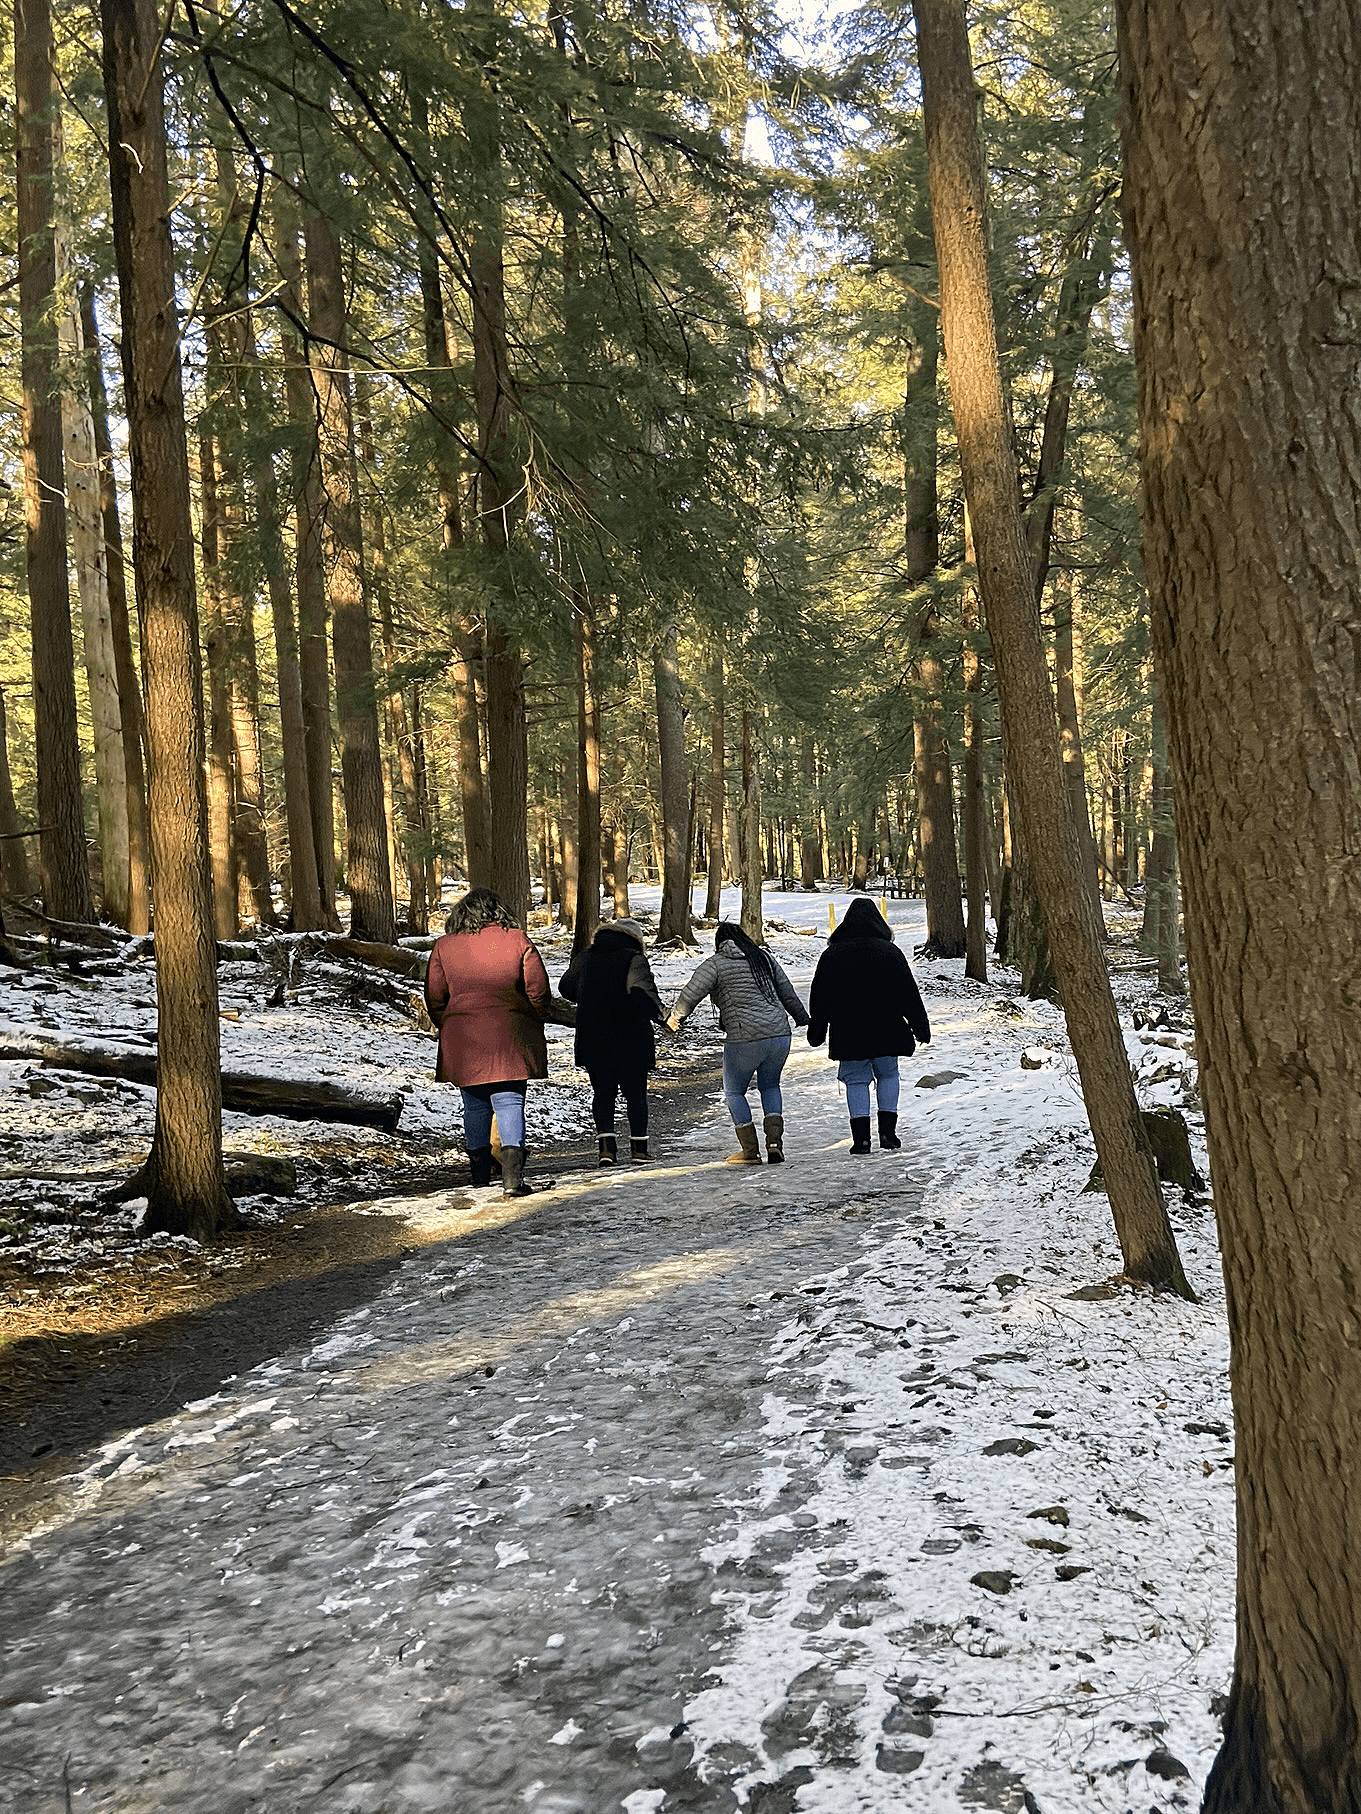 Day one participants take a walk along the snow-covered ground of a forest during the winter. They are side-by-side and dressed in warm clothes. The sun streams in through the trees, dappling the trunks and ground with a yellowy light.